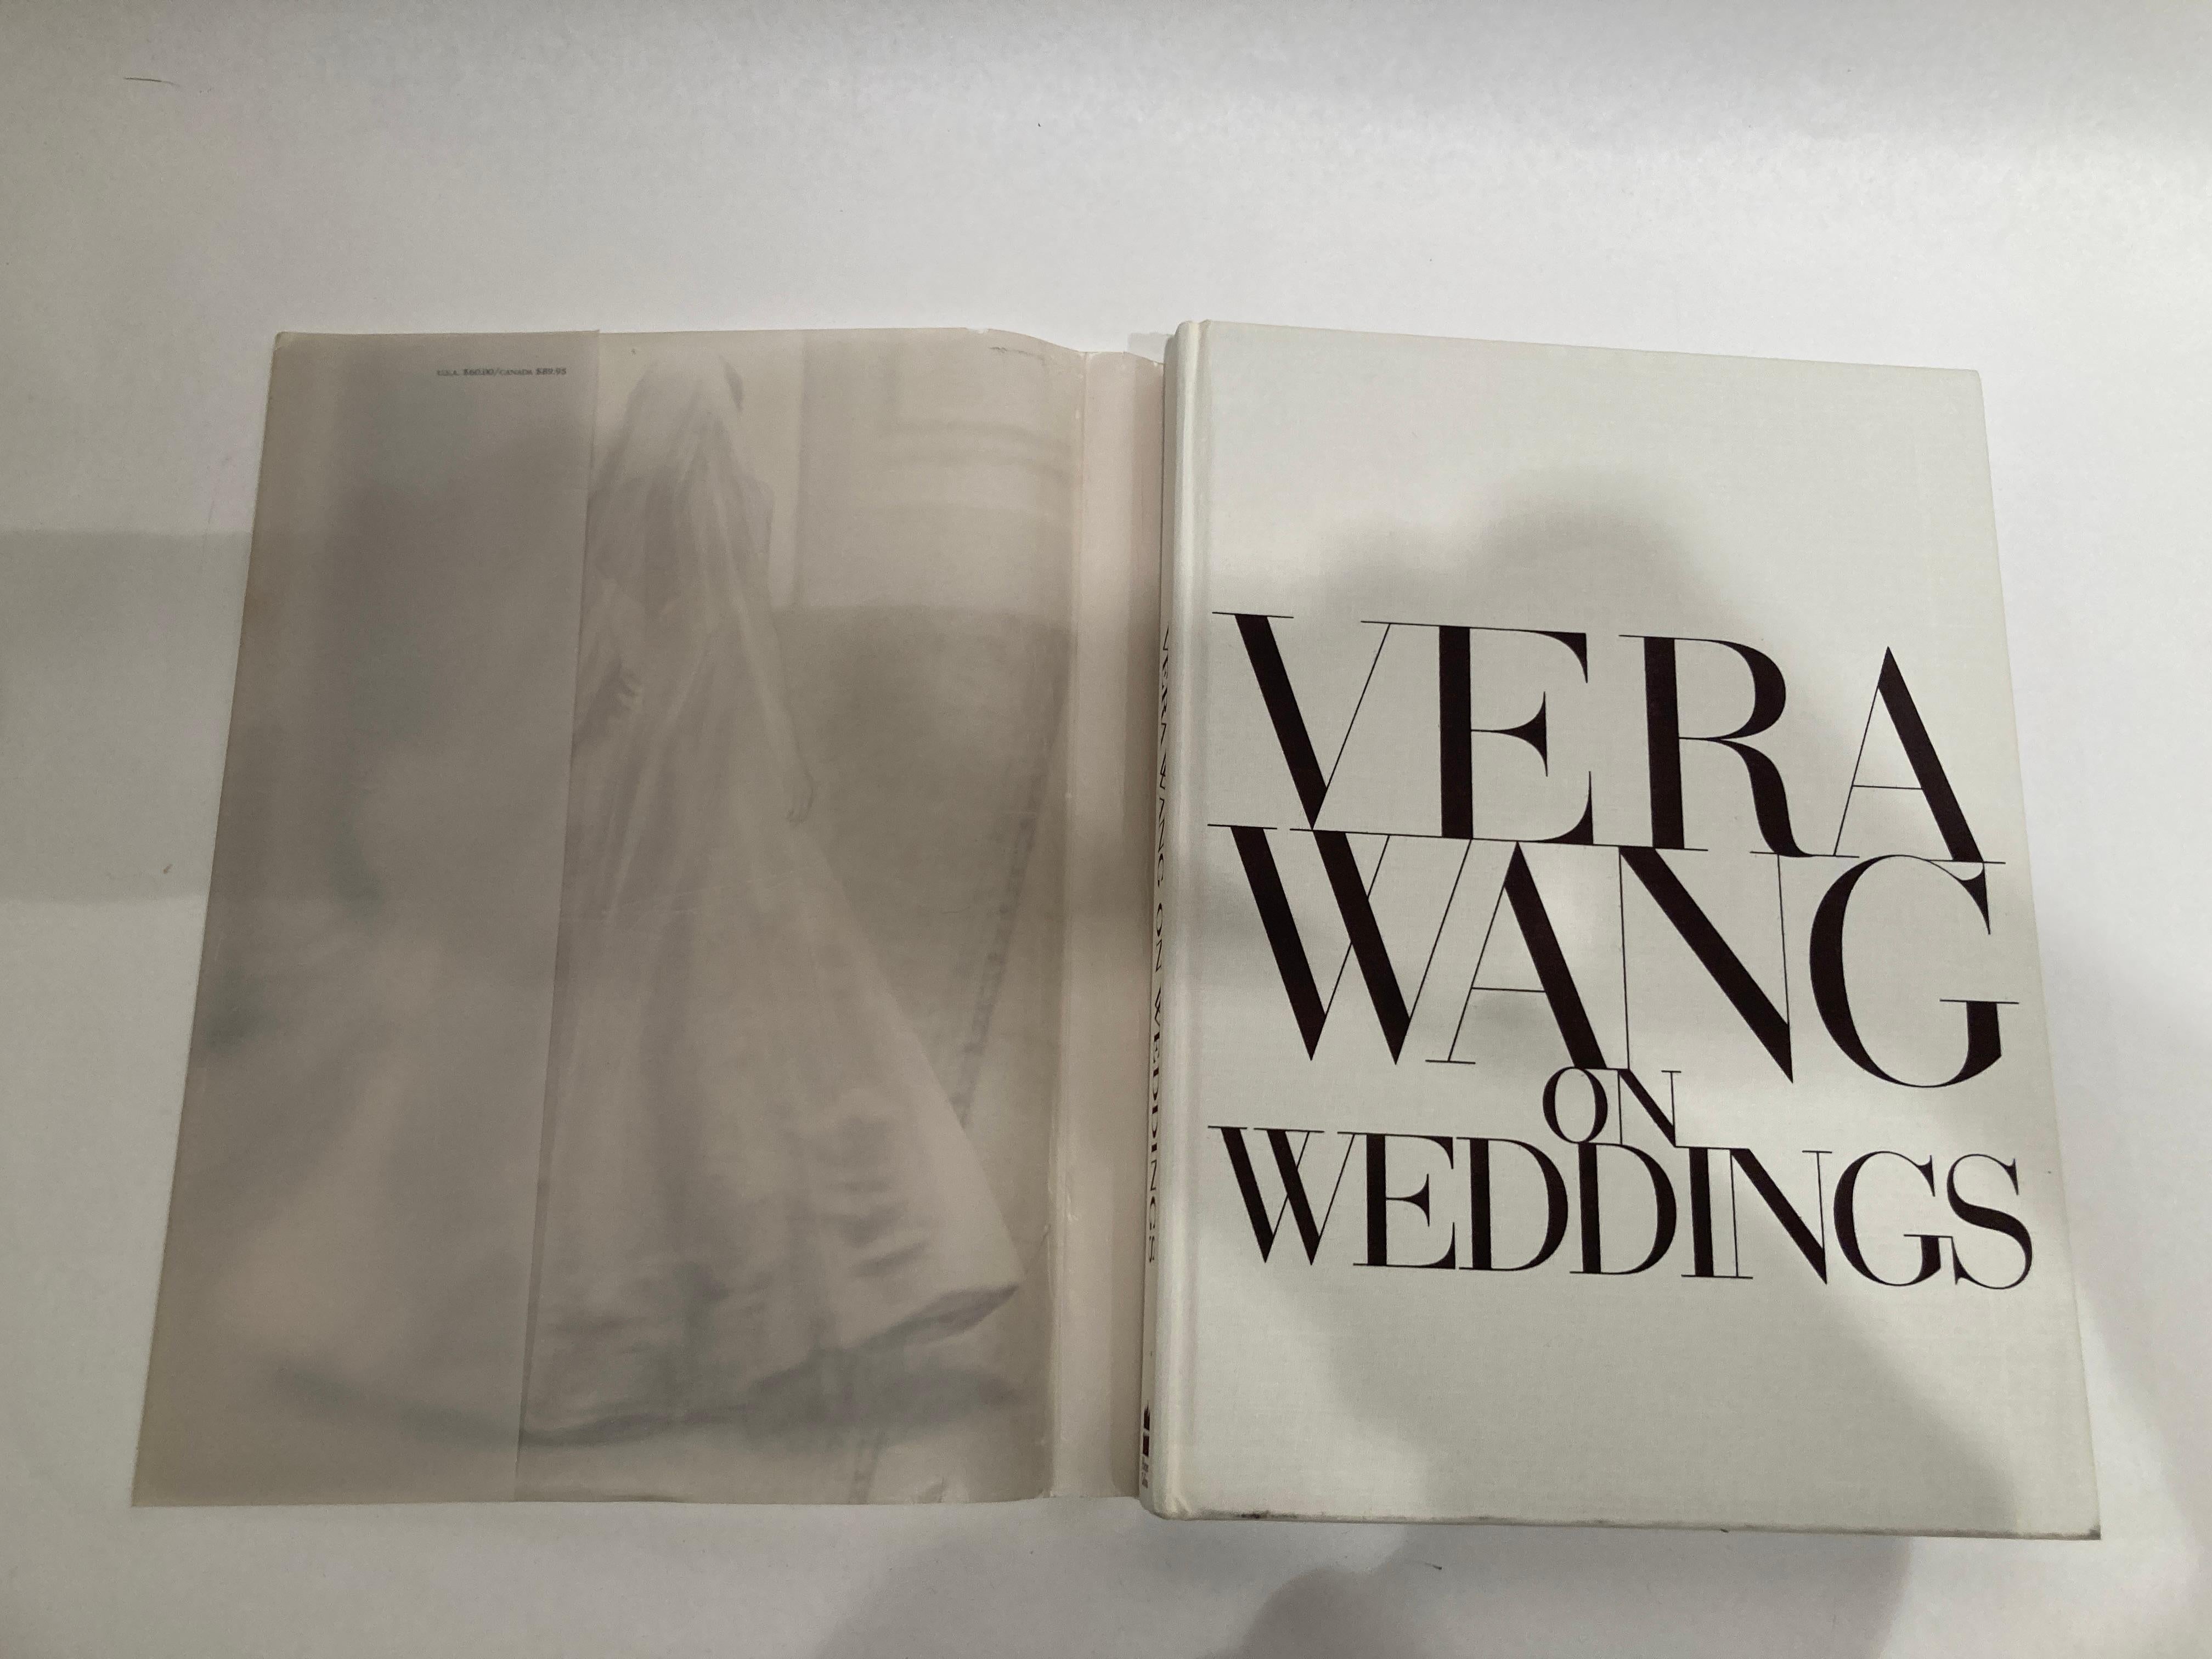 Vera Wang On Weddings by Vera Wang Large Hardcover Book For Sale 12